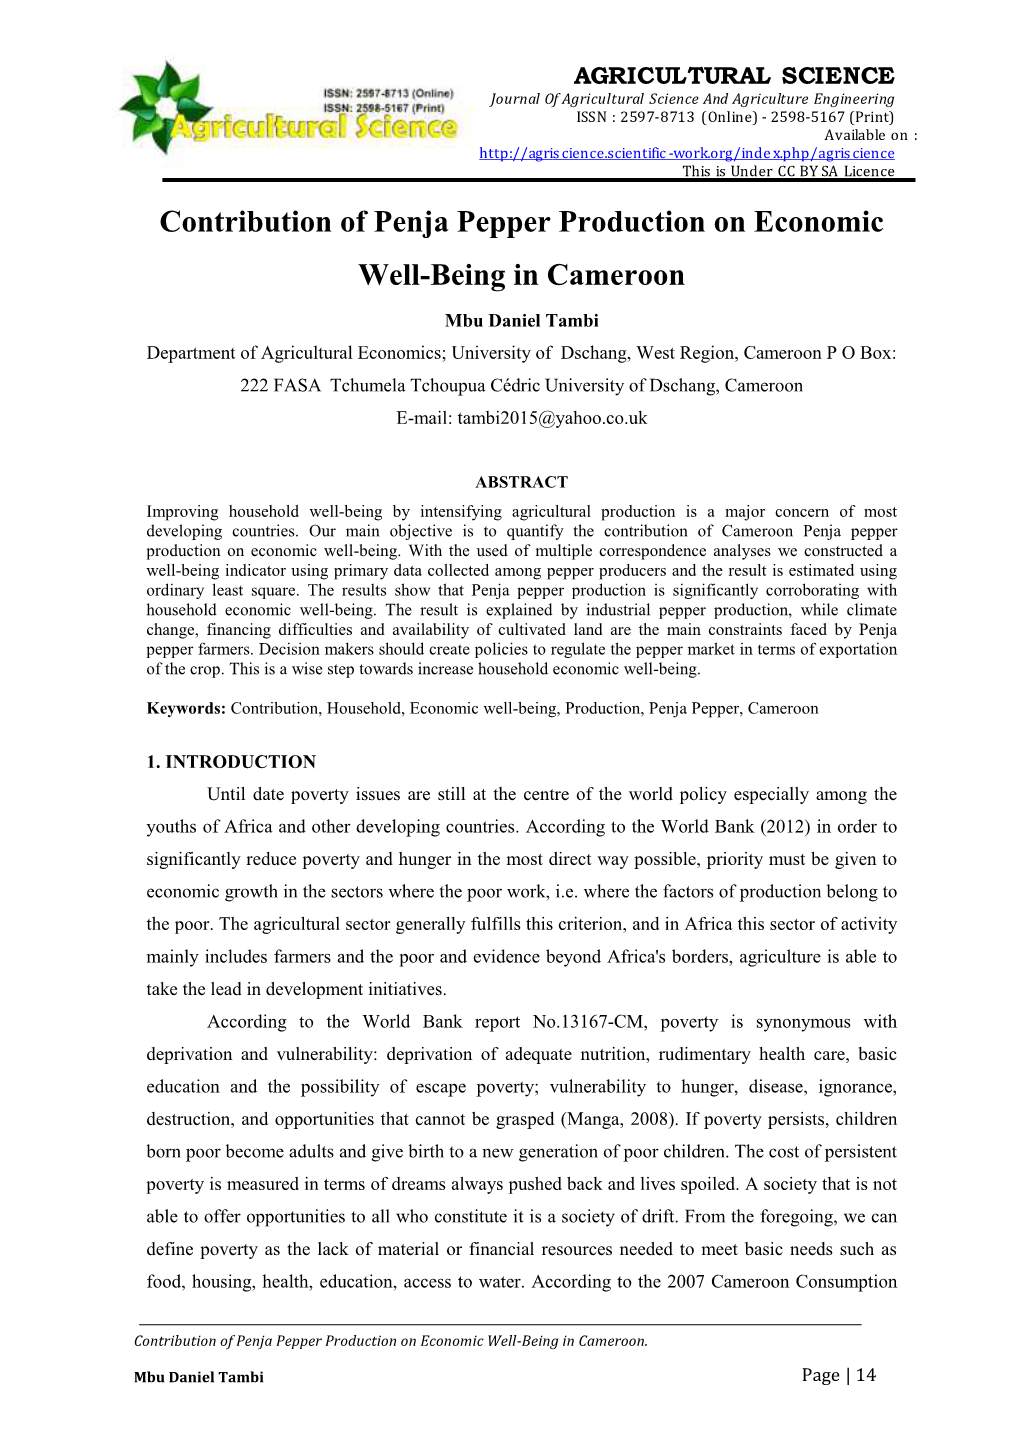 Contribution of Penja Pepper Production on Economic Well-Being in Cameroon